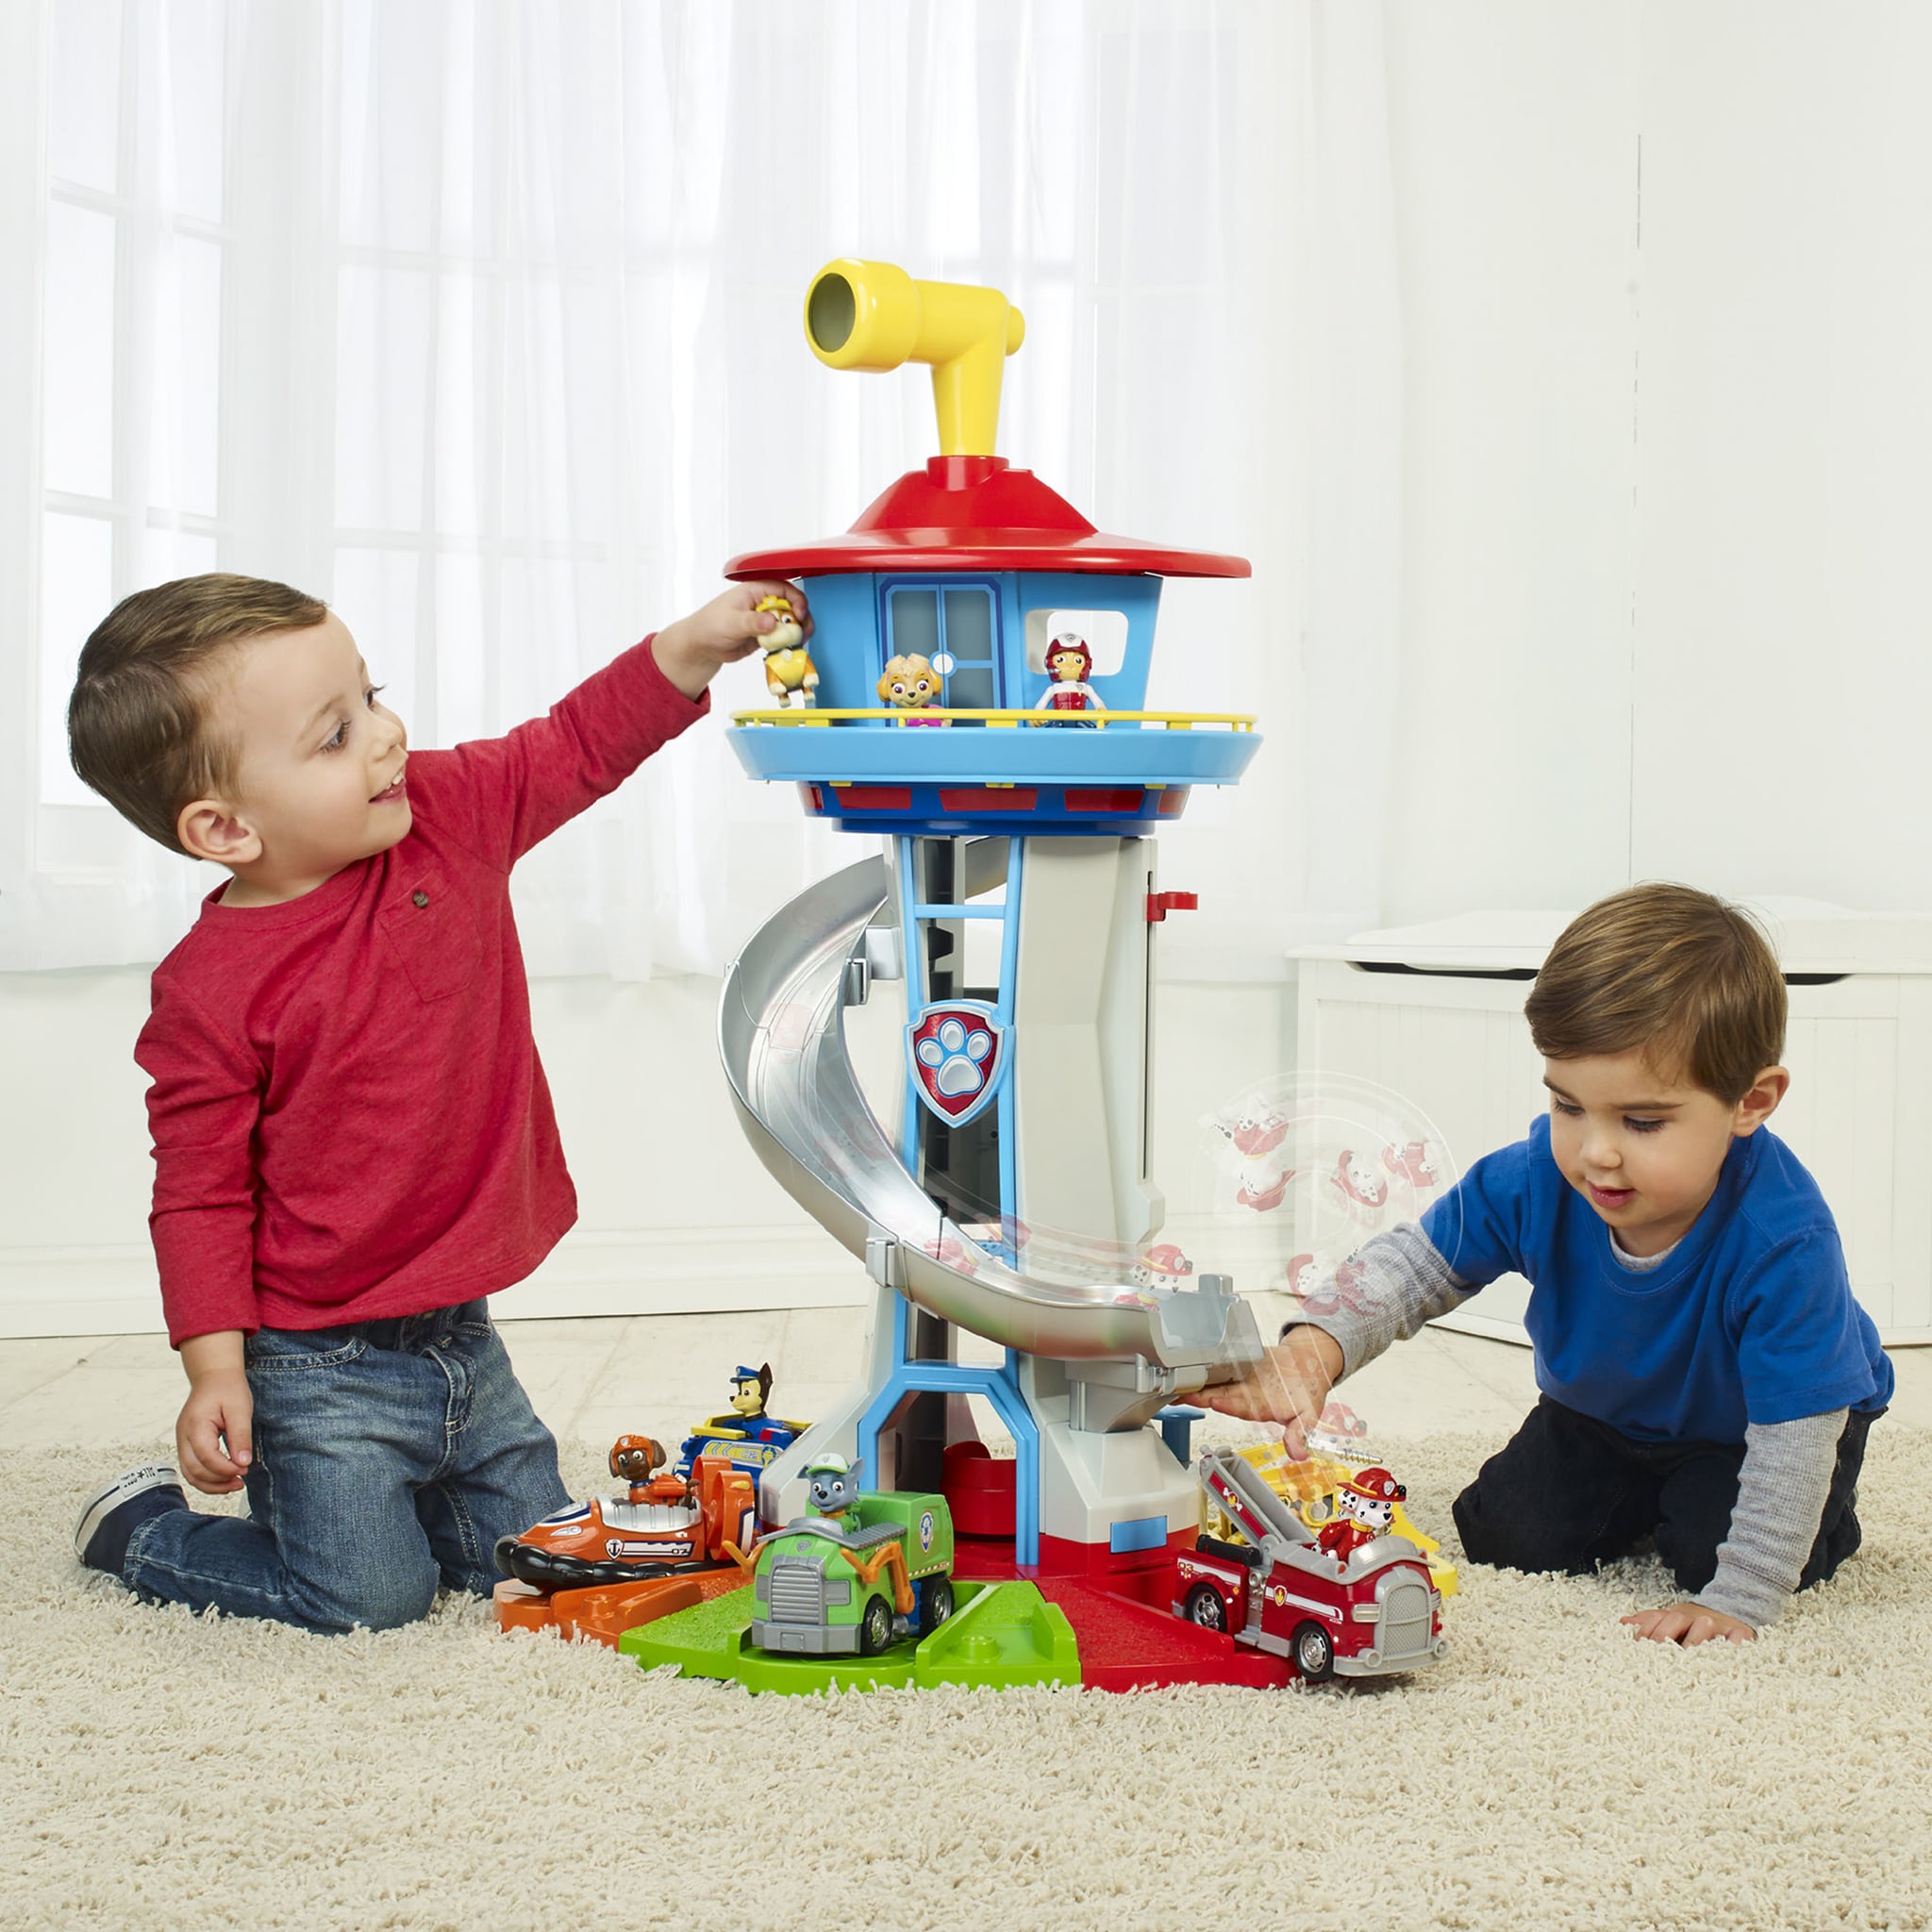 top toys for 2 year old boys